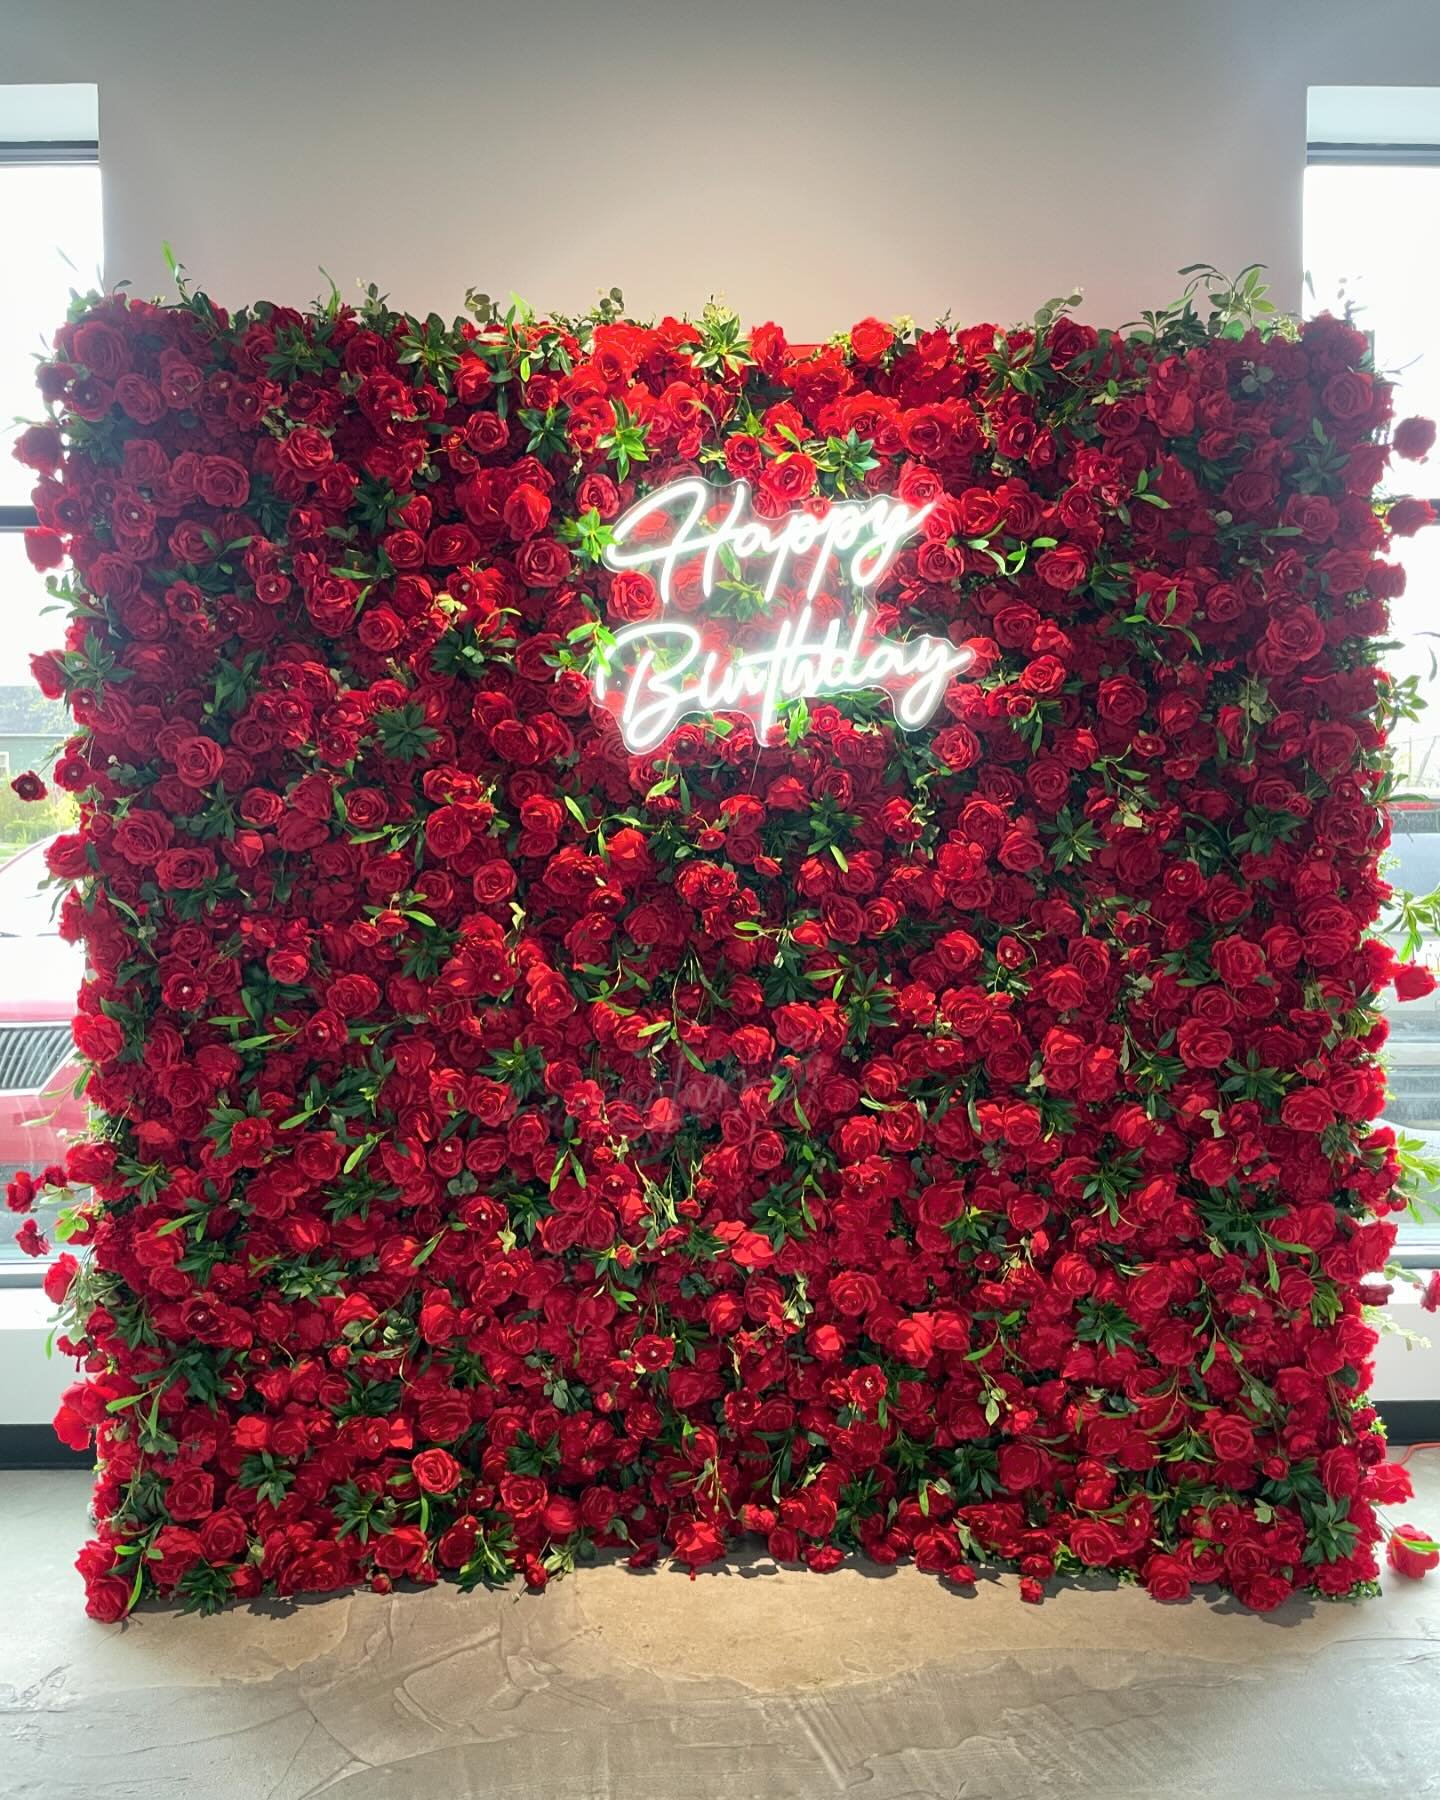 Happy Birthday with our &ldquo;Ruby Flower Wall&rdquo; ❤️&zwj;🔥🌹

📲For flower wall inquires please email info@greatlakeseventplanning.com, submit a form on our website or send a DM 

If you have a sign, I&rsquo;d love to install it for you. 🪜⛓️My